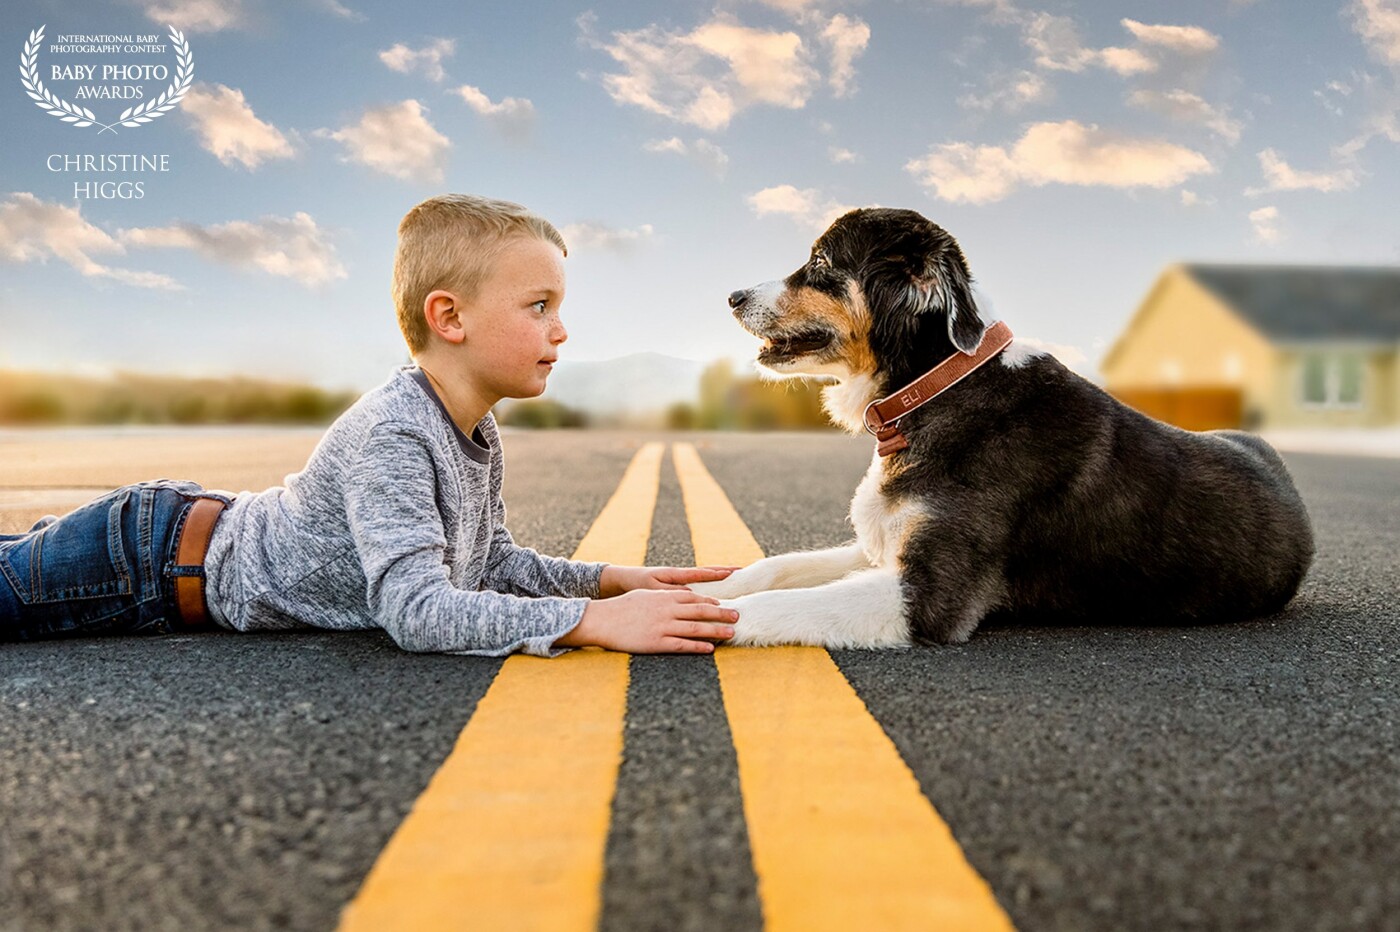 Meet Logan (age 5) and Eli (dog). Logan and Eli are planning an adventure away from home. Logan is preparing Eli with the details of their journey and the challenges they will face together.